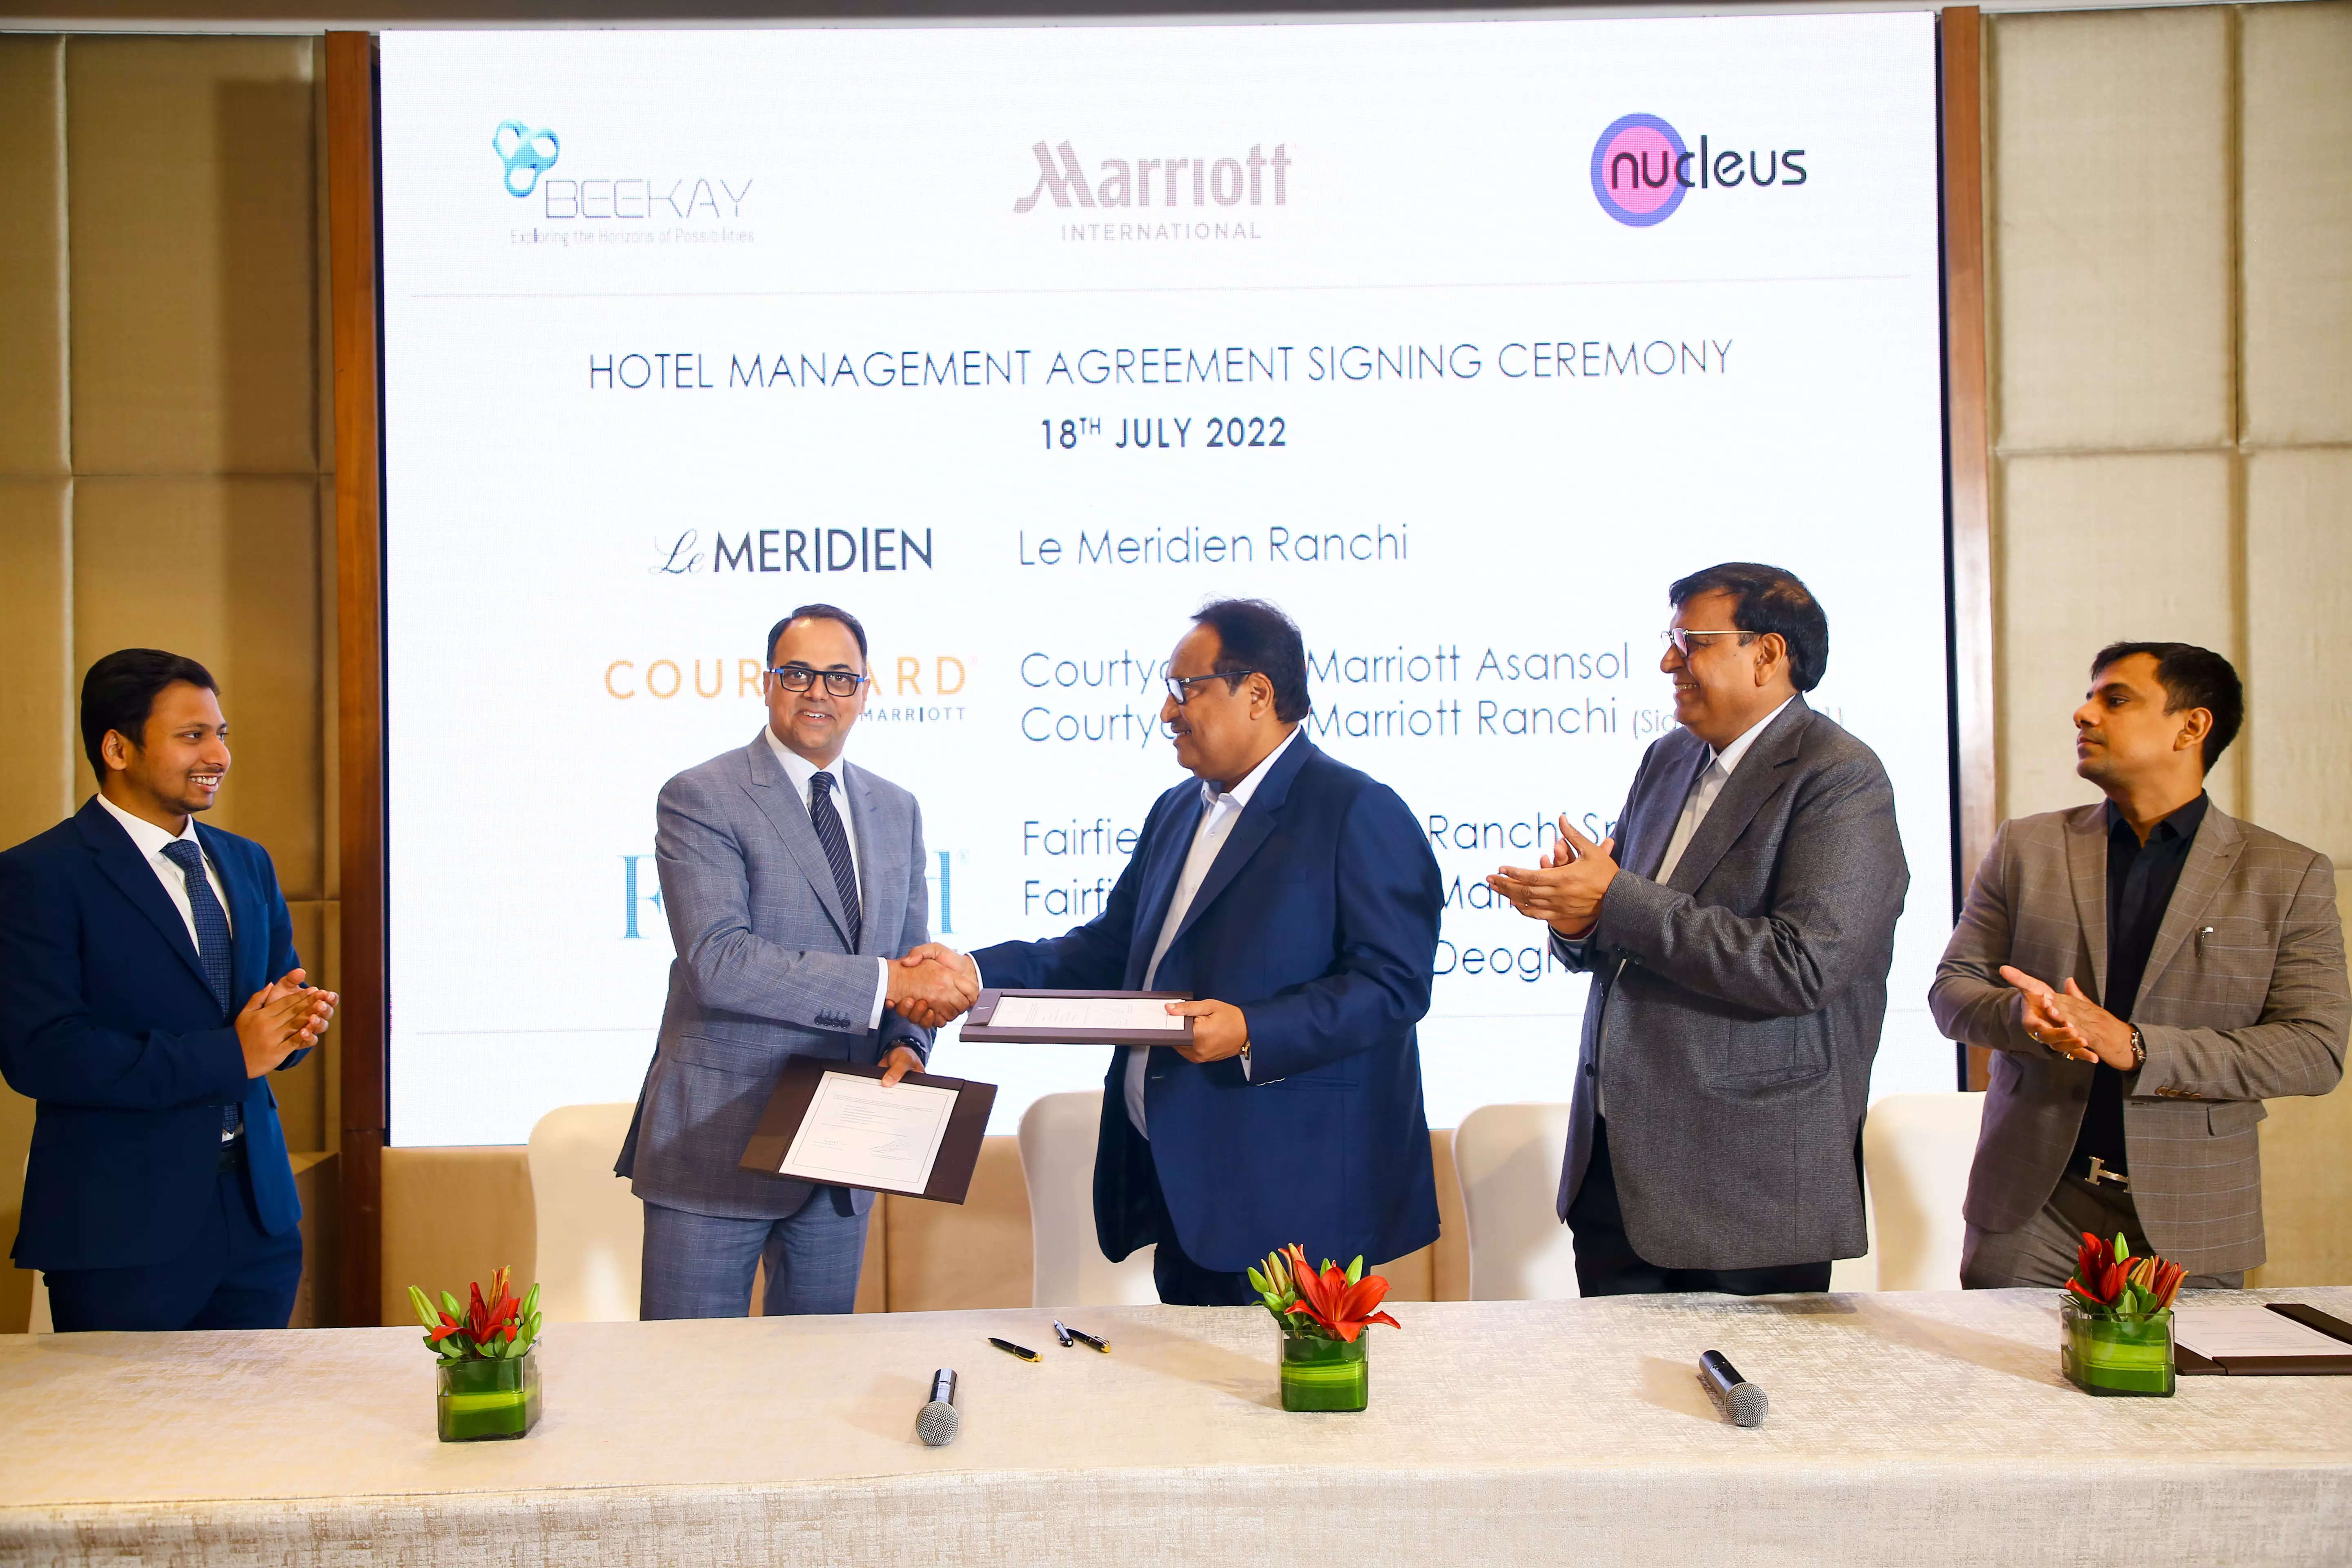 Marriot will launch 5 new hotels in West Bengal & Jharkhand in partnership with Beekay Group